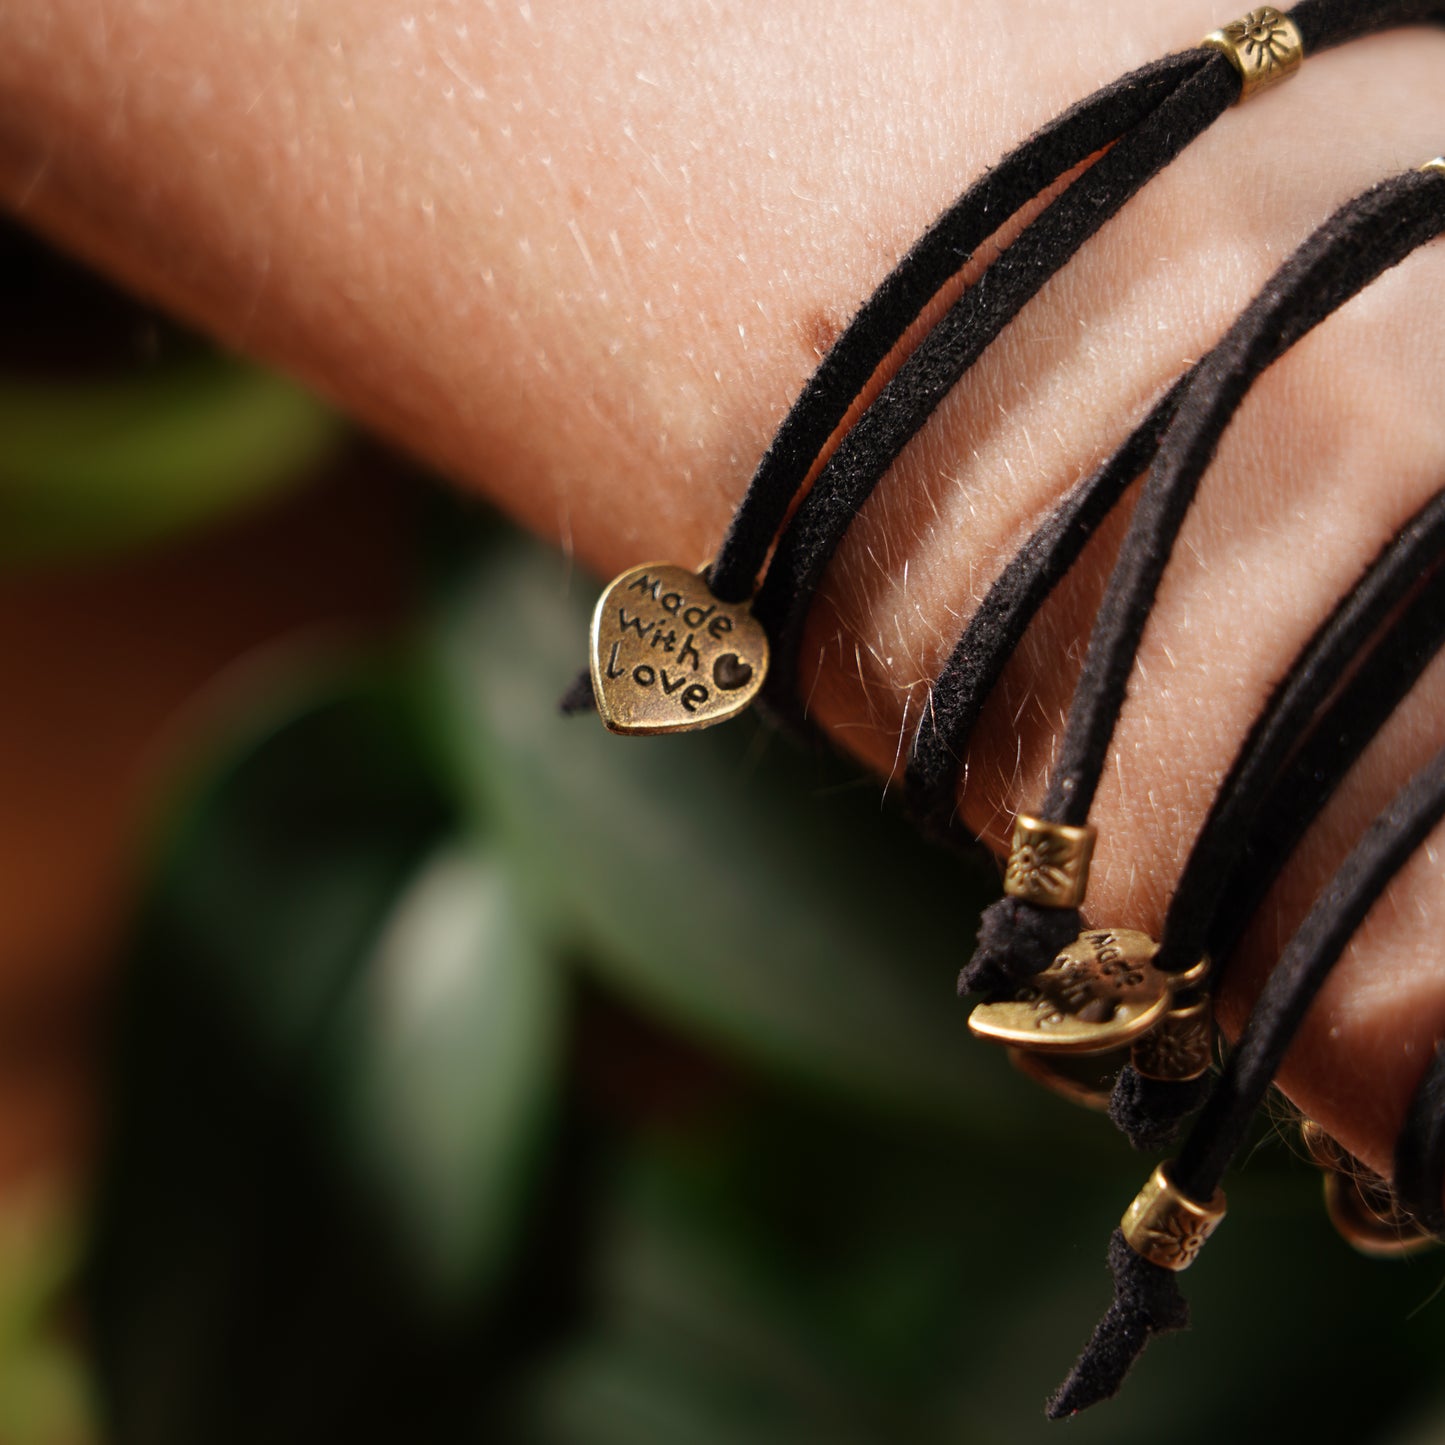 Lucky Bracelet Set For Good Luck, Wealth, Wisdom, and Protection - Black